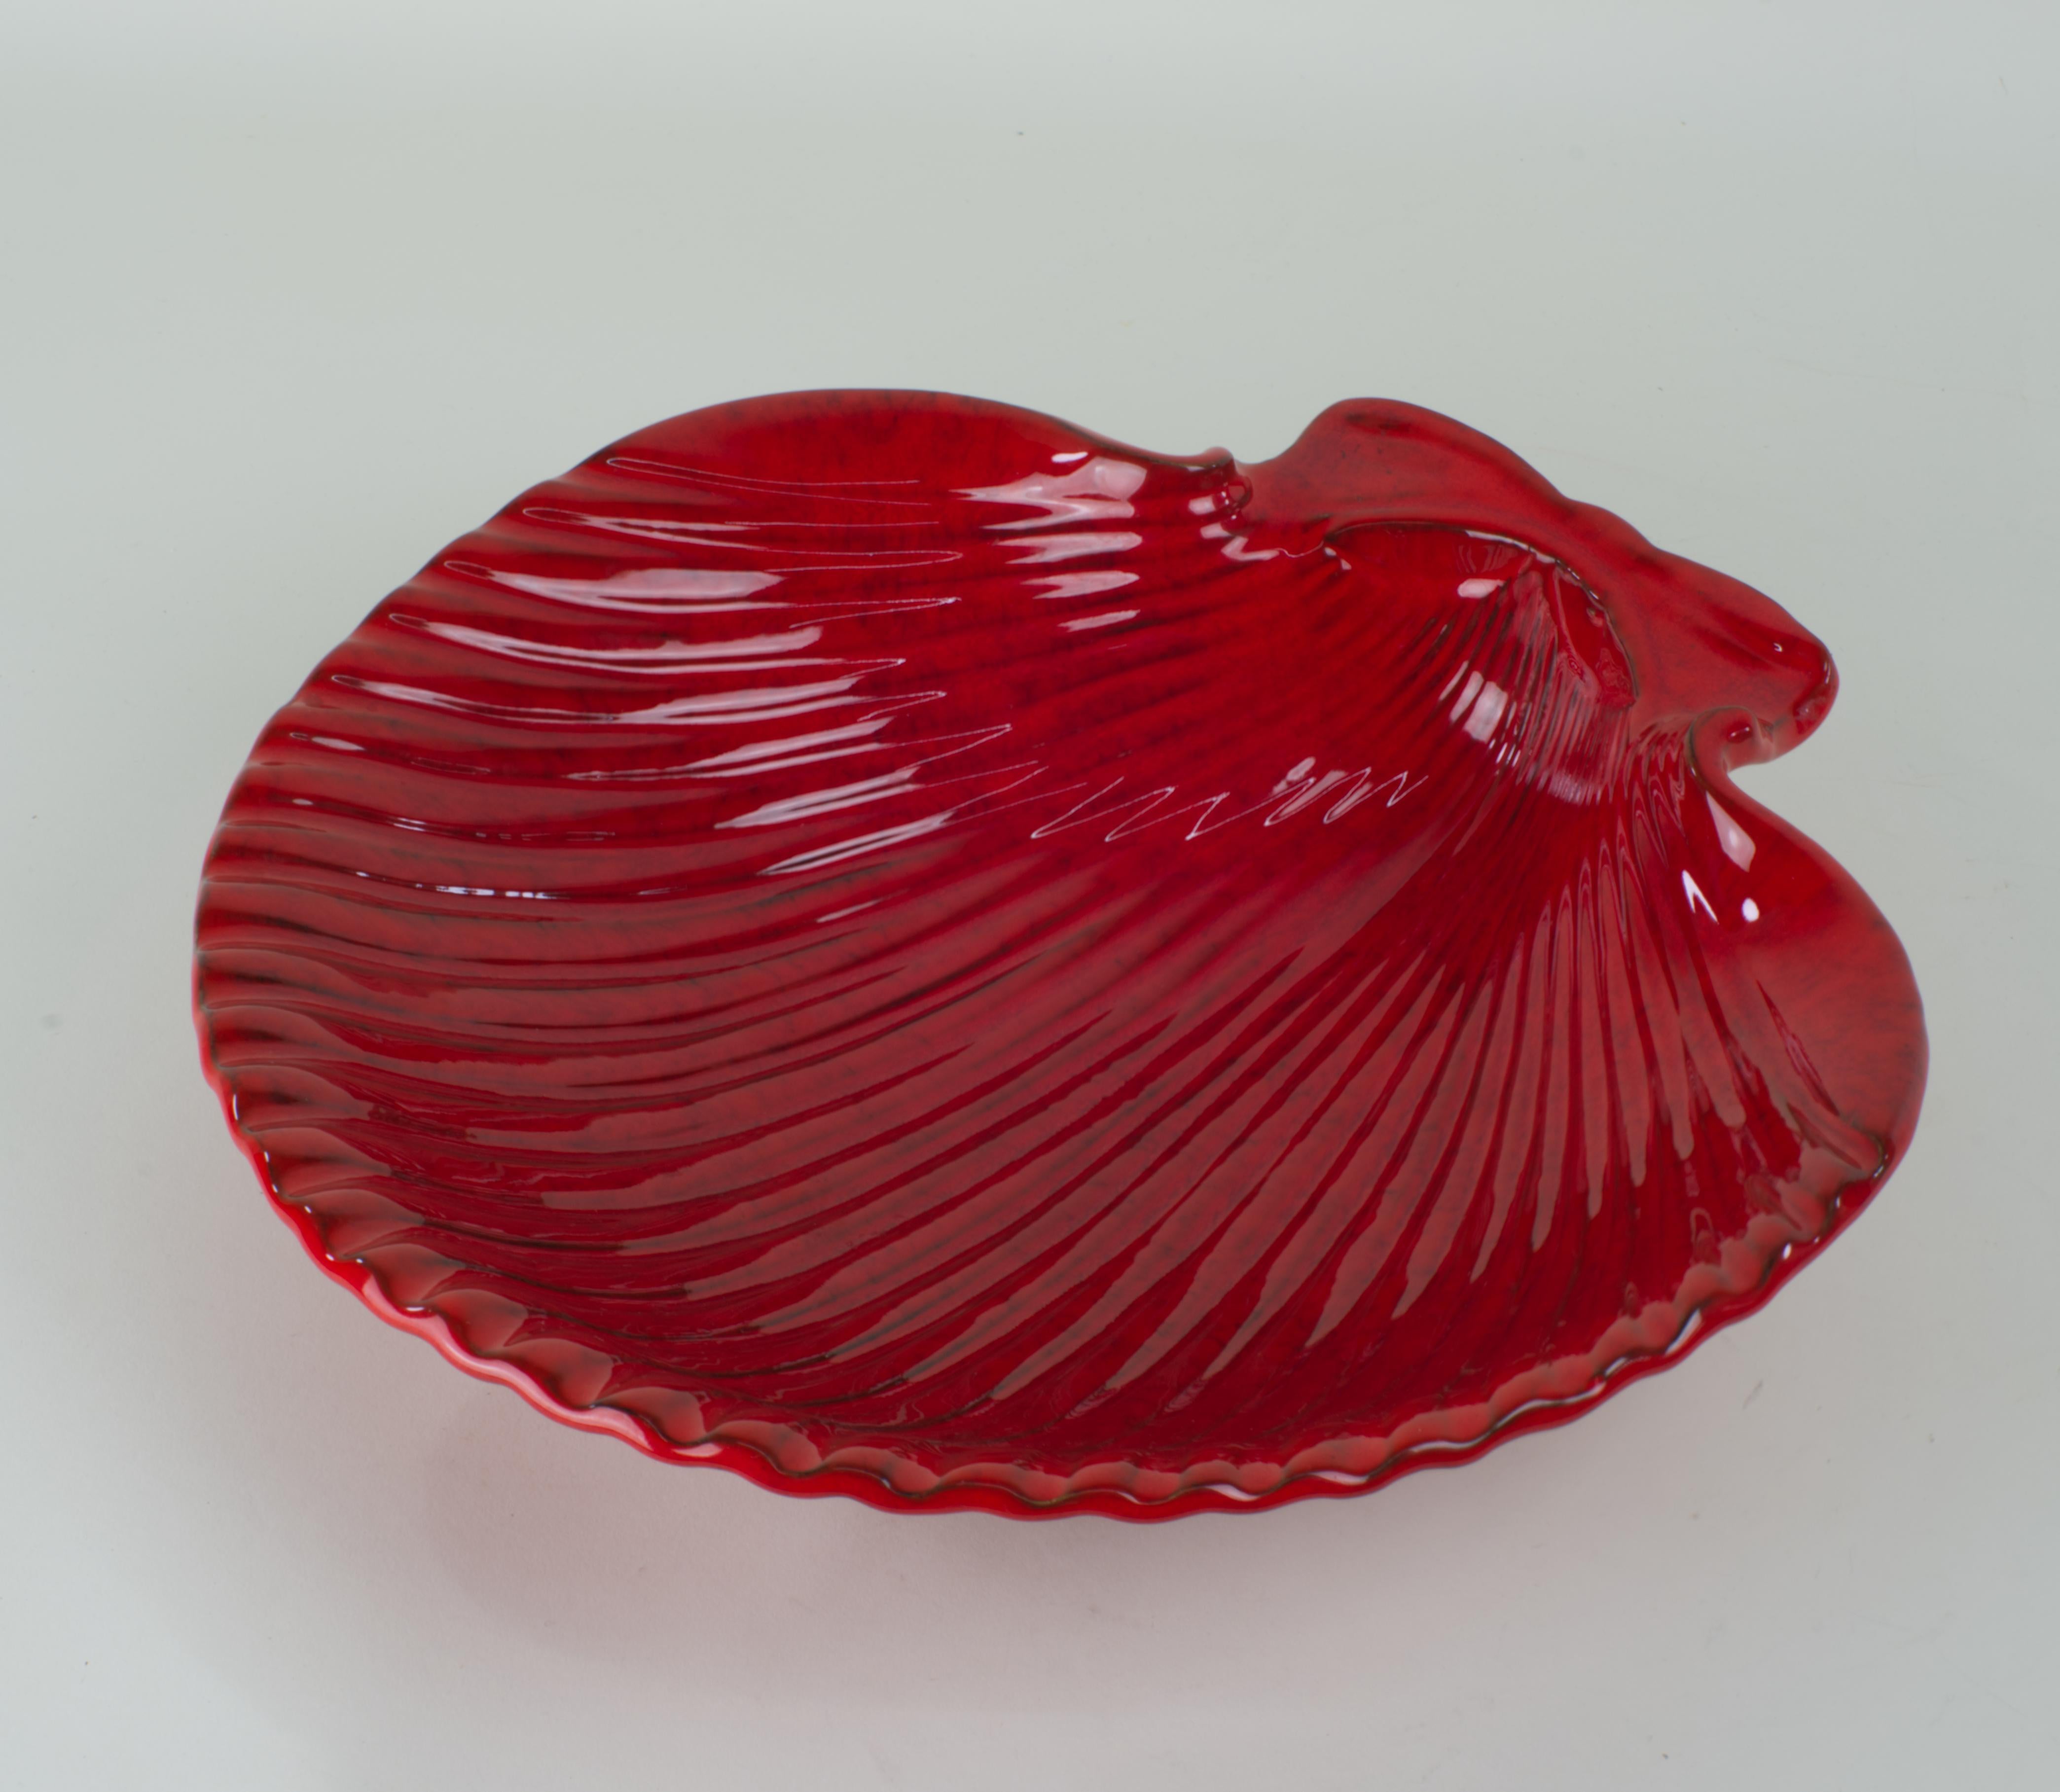 
Shell-shaped ceramic bowl is glazed in red with complex variations in glaze color accentuating the intricate shape of the bowl. 

The bowl is signed on the bottom with 